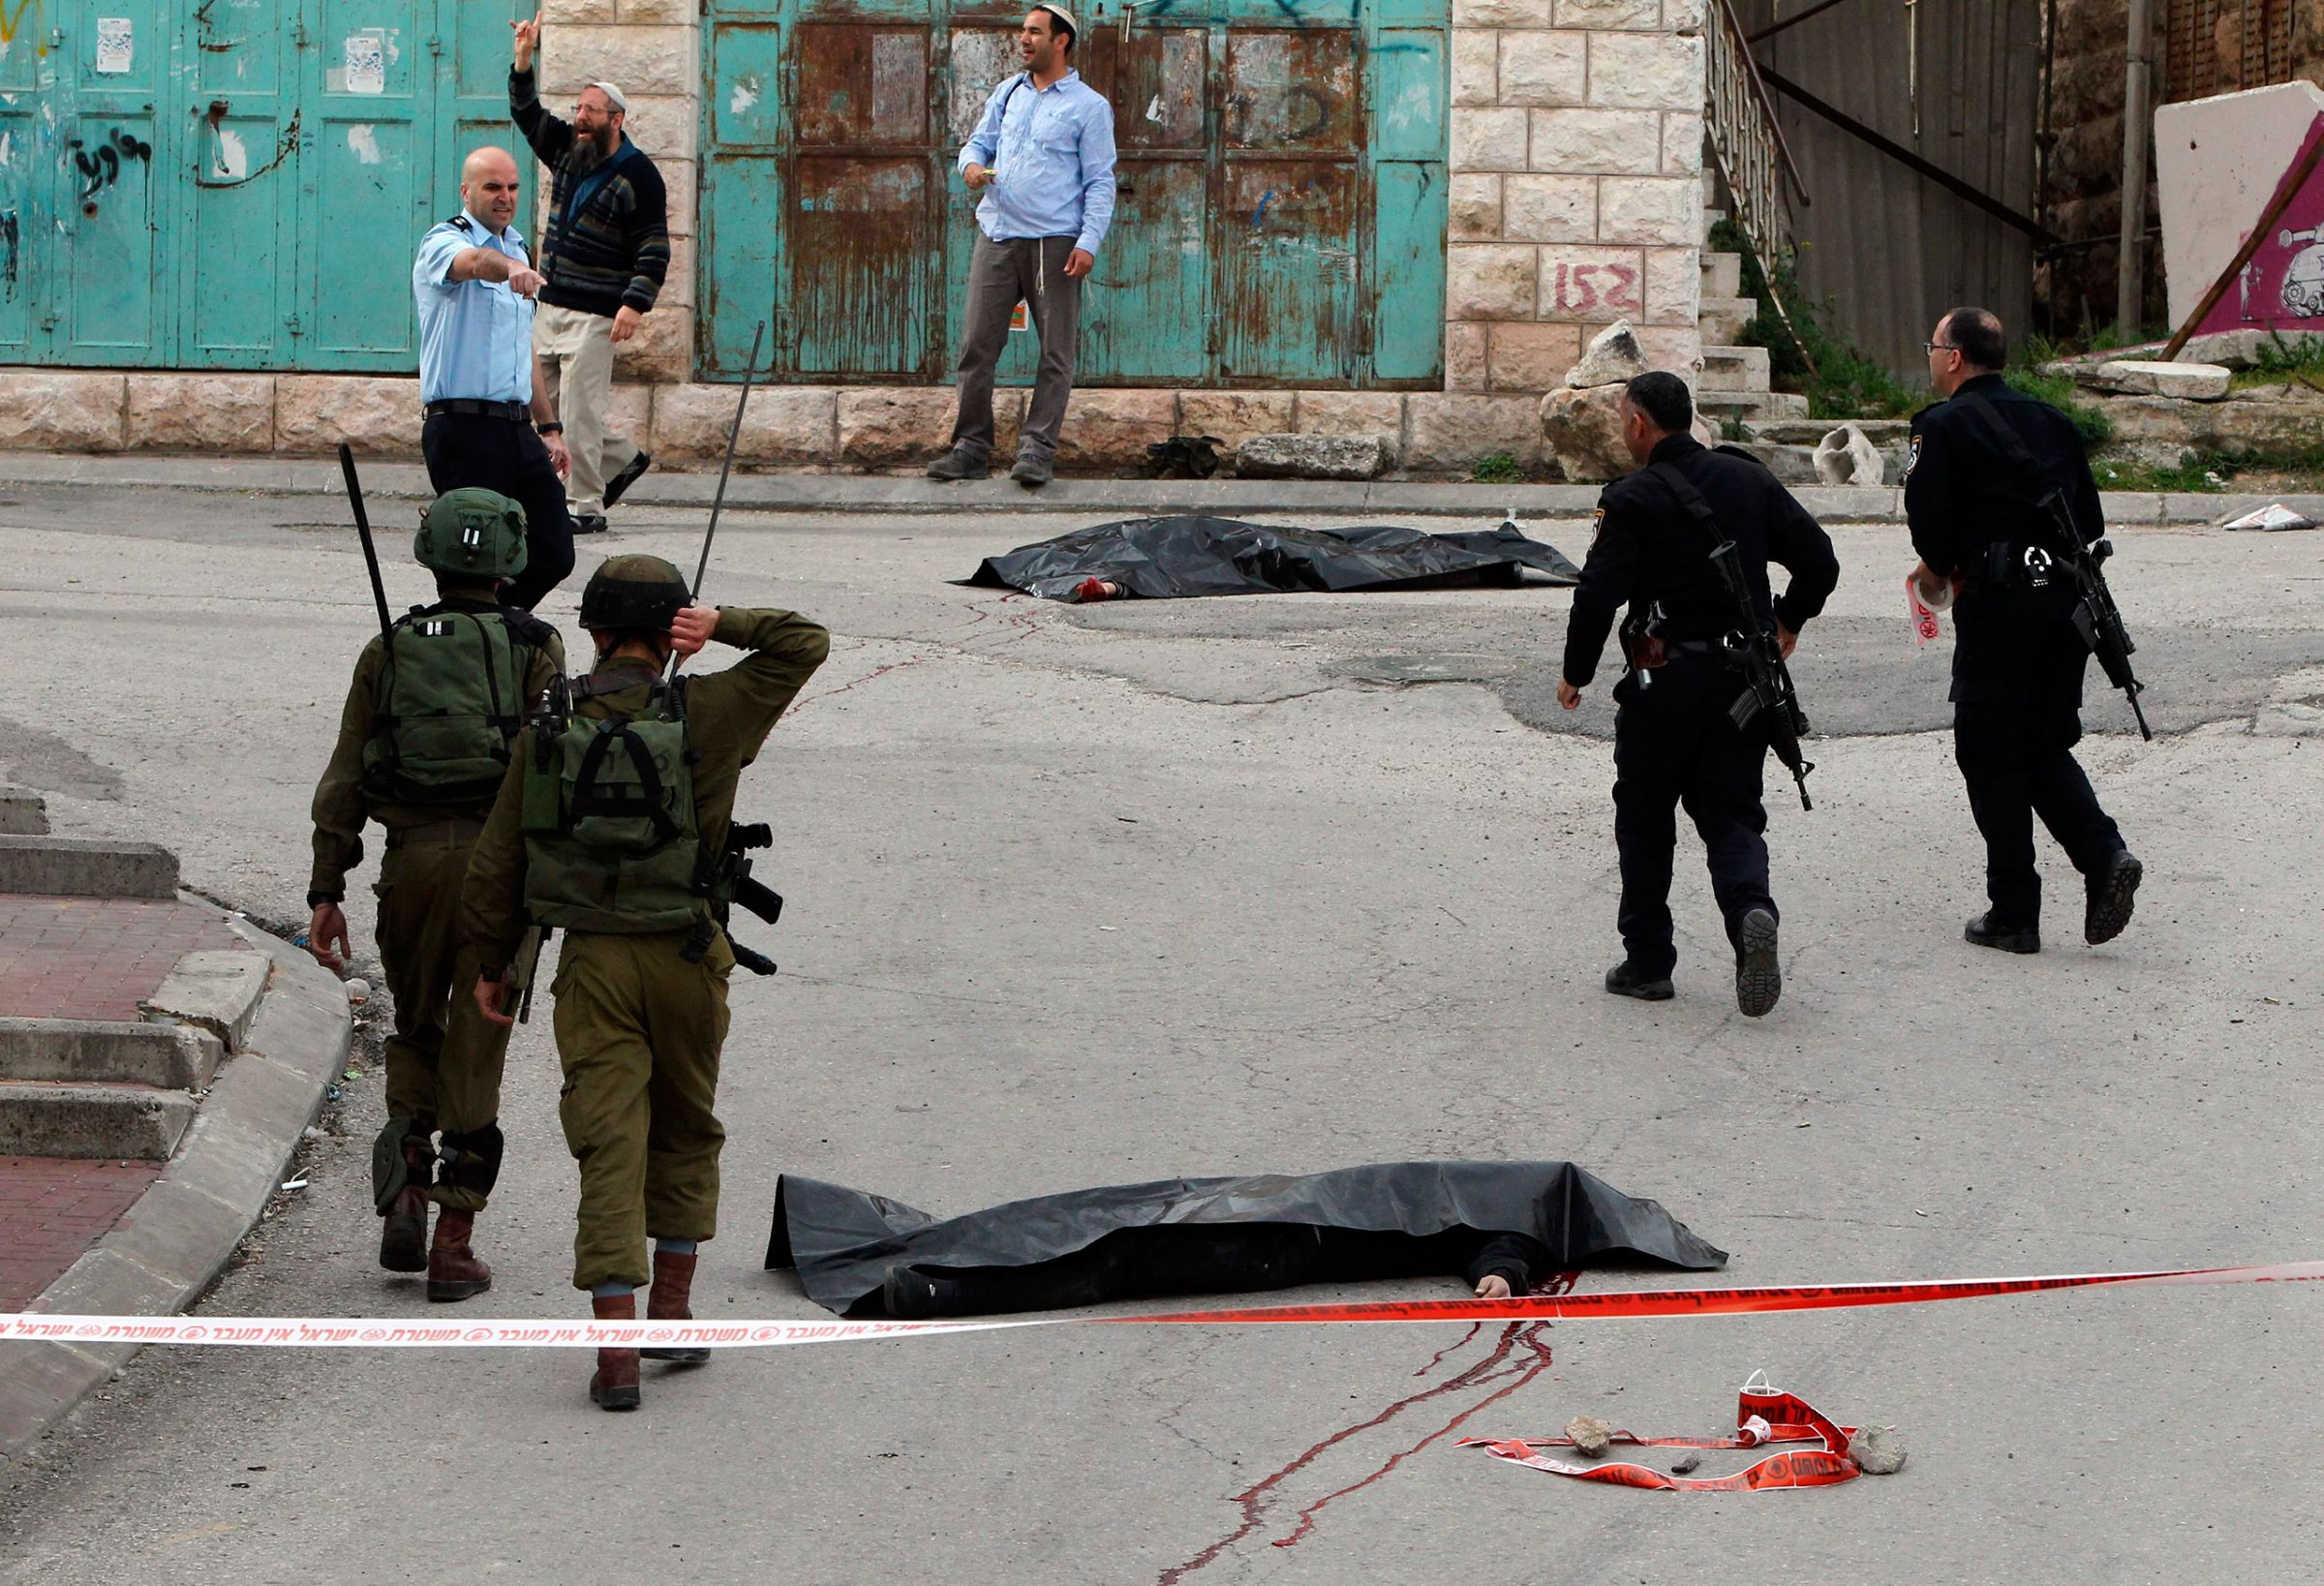 Israeli soldiers and police officers walk near the bodies of two Palestinians who were killed after wounding an Israeli soldier in a knife attack, before being shot dead by troops, in Hebron, West bank, March 24, 2016.